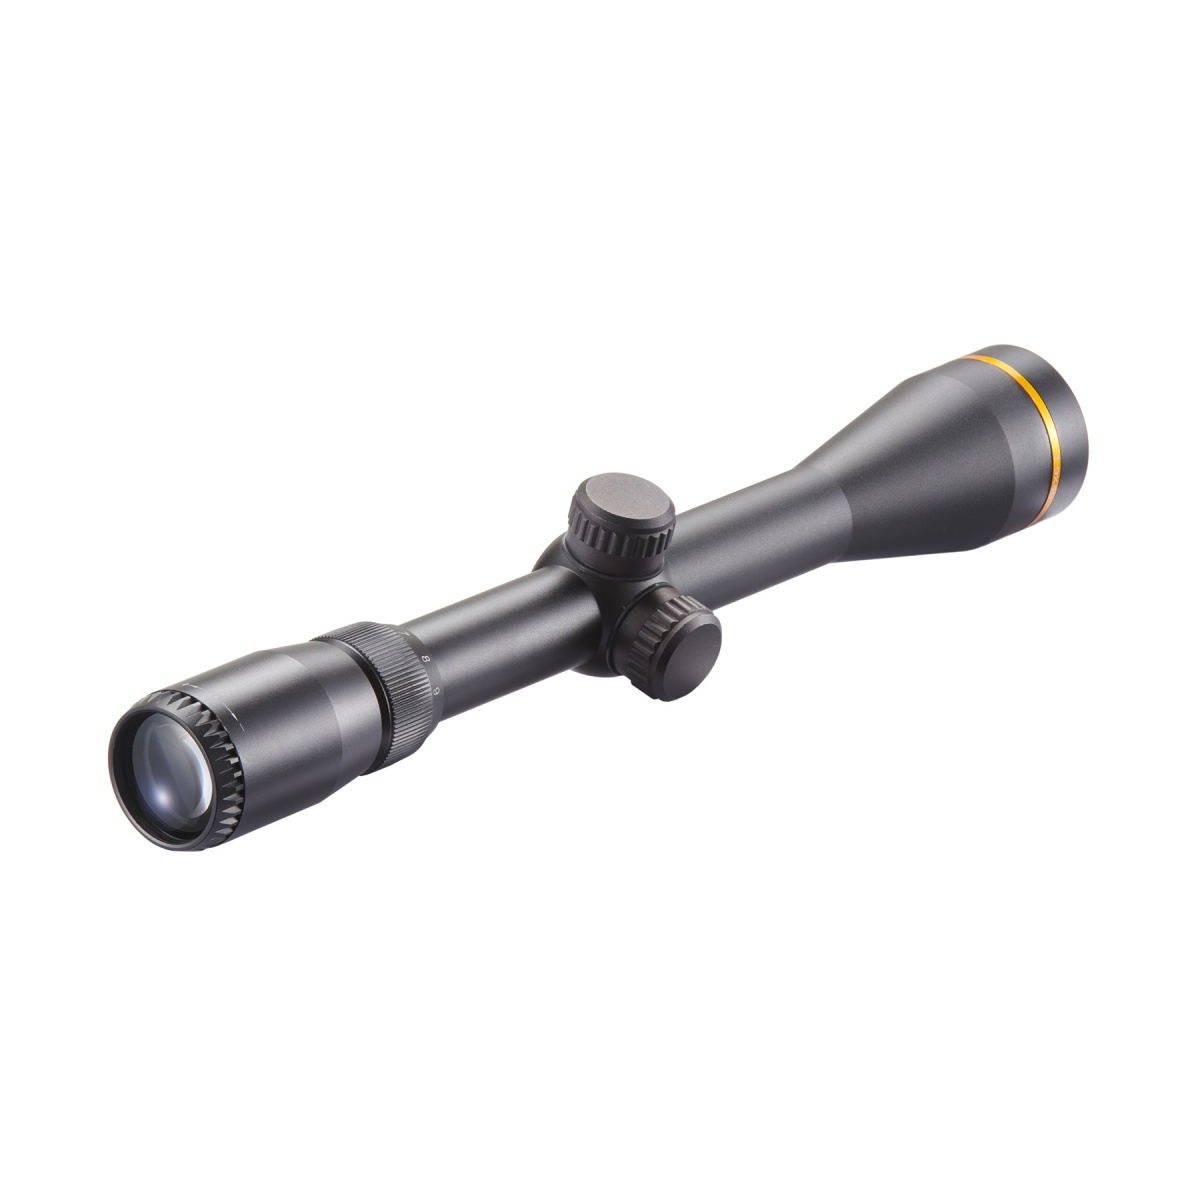 Lancer Tactical 3-9x40mm Rifle Scope With Mounting Rings 14590 for sale online 